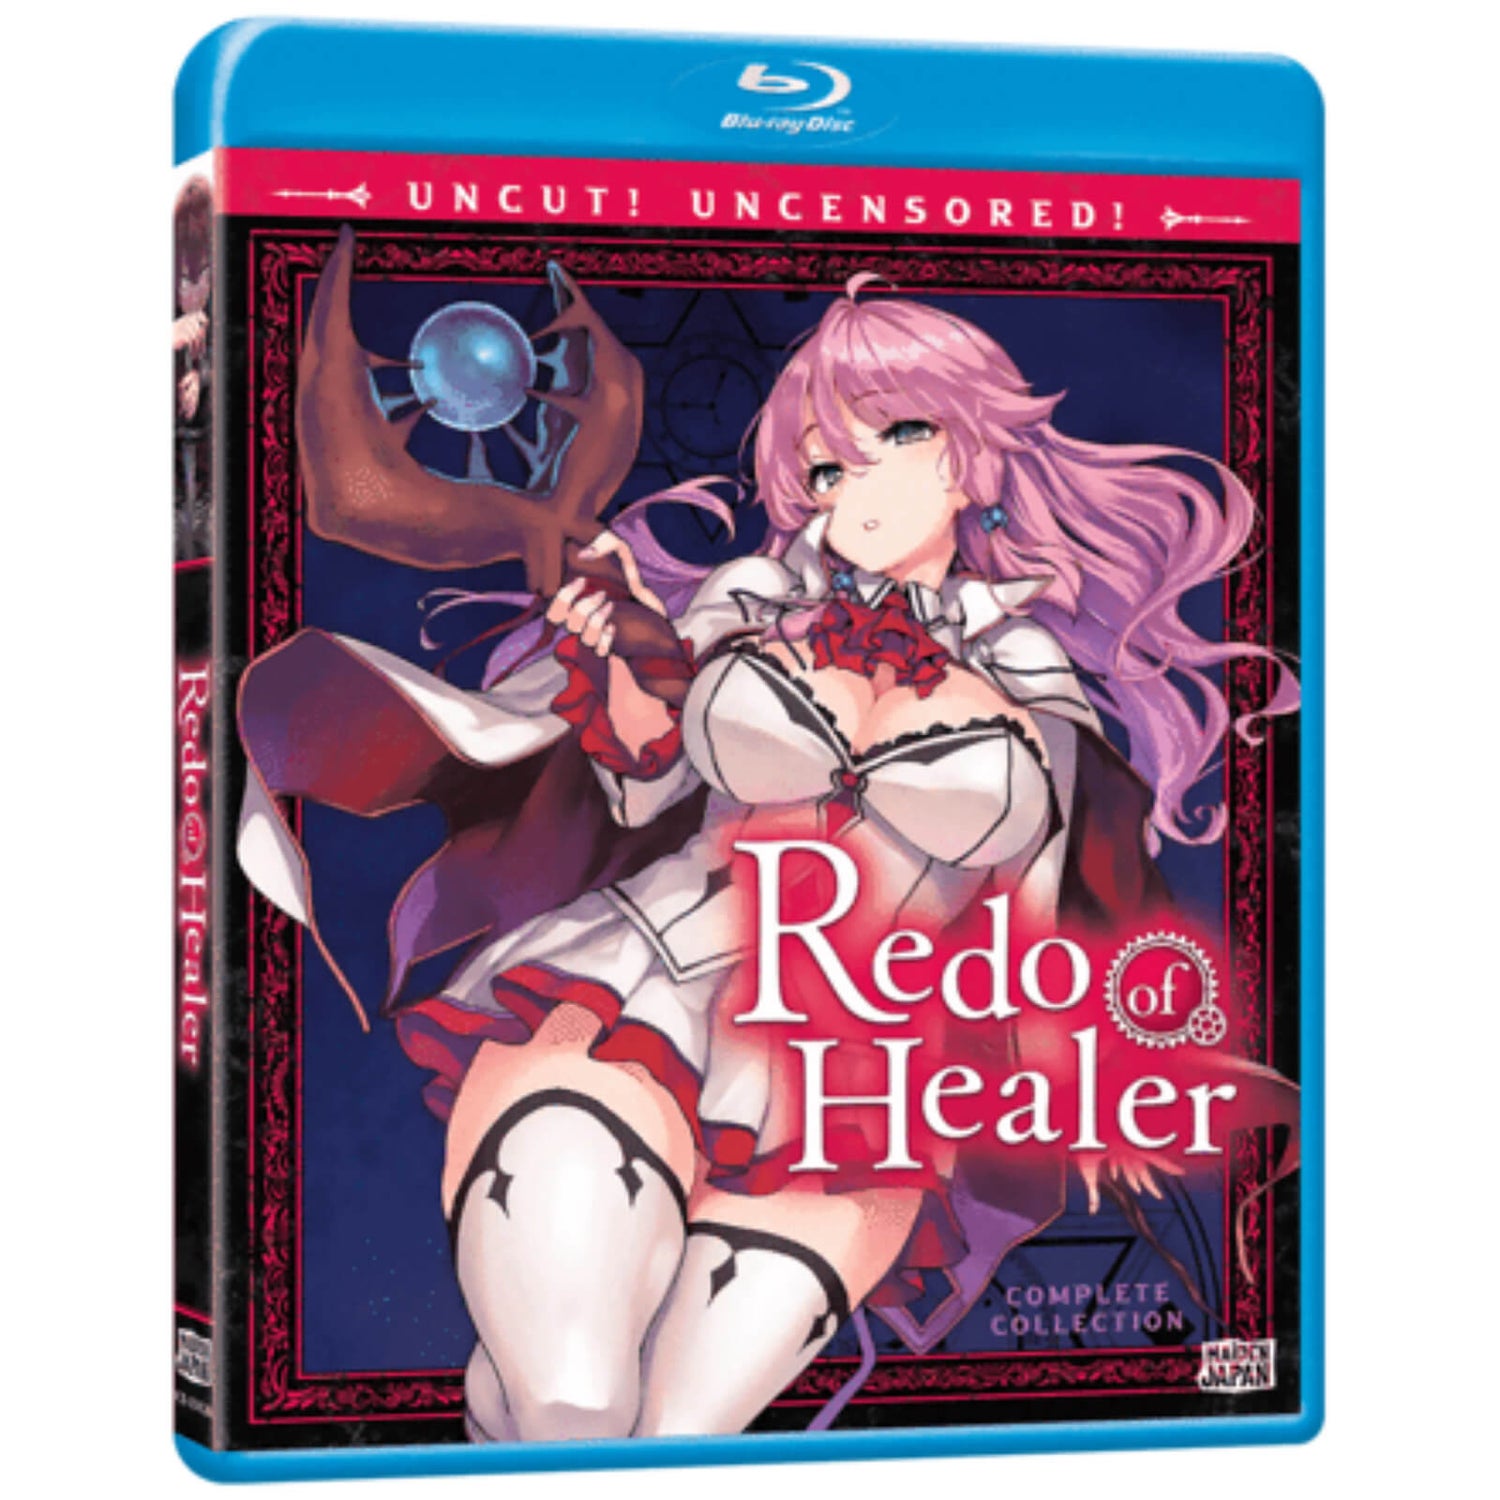 Redo of Healer manga: Where to read, what to expect, and more